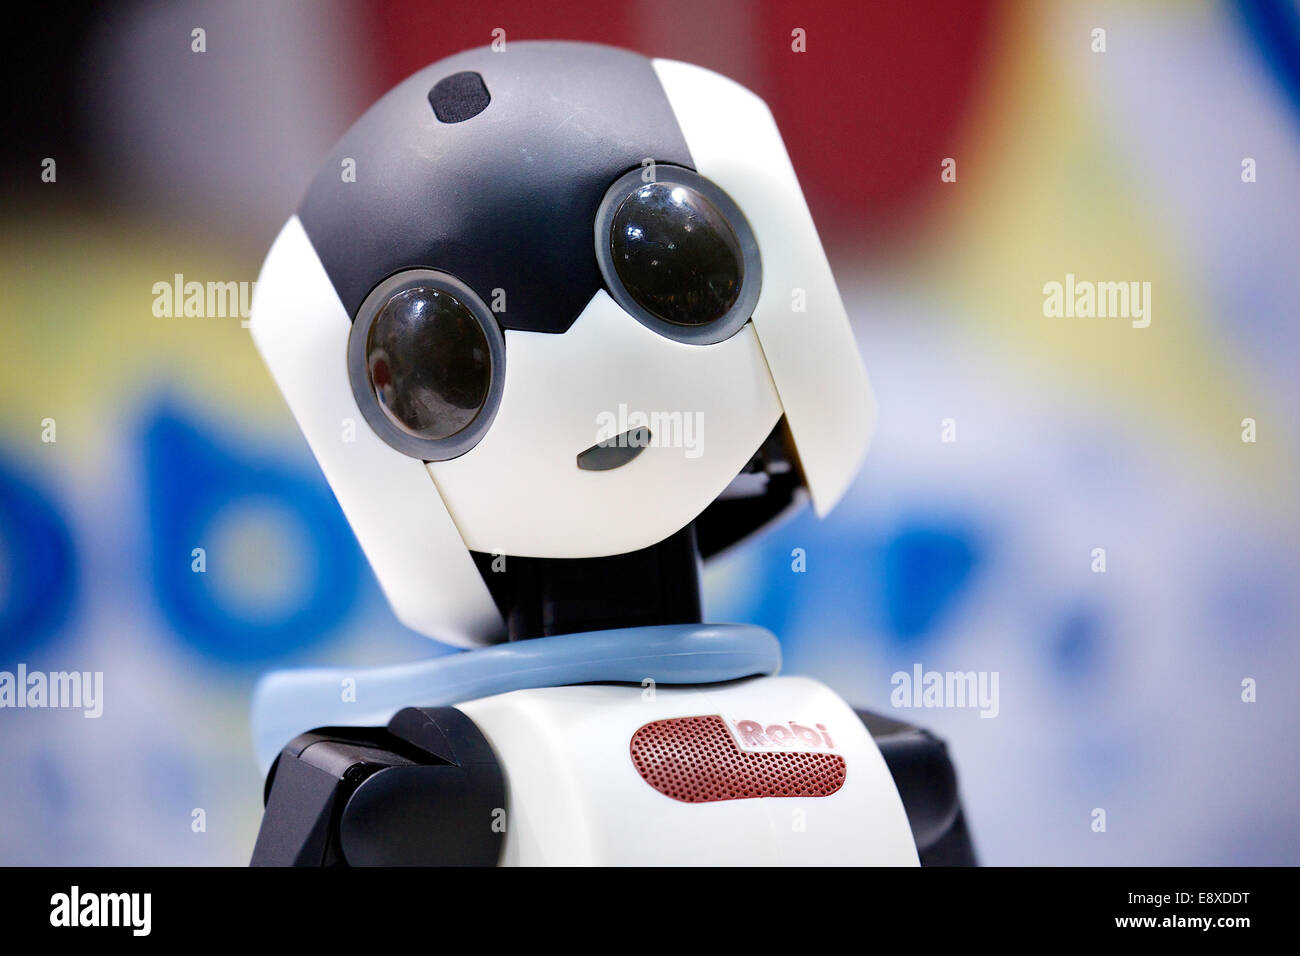 Tokyo, Japan. 16th October, 2014. The robot of Takara Tomy "Robi" can speak  1000 Japanese phrases to respond to human voice at the Japan Robot Week  2014 on October 16, 2014 in